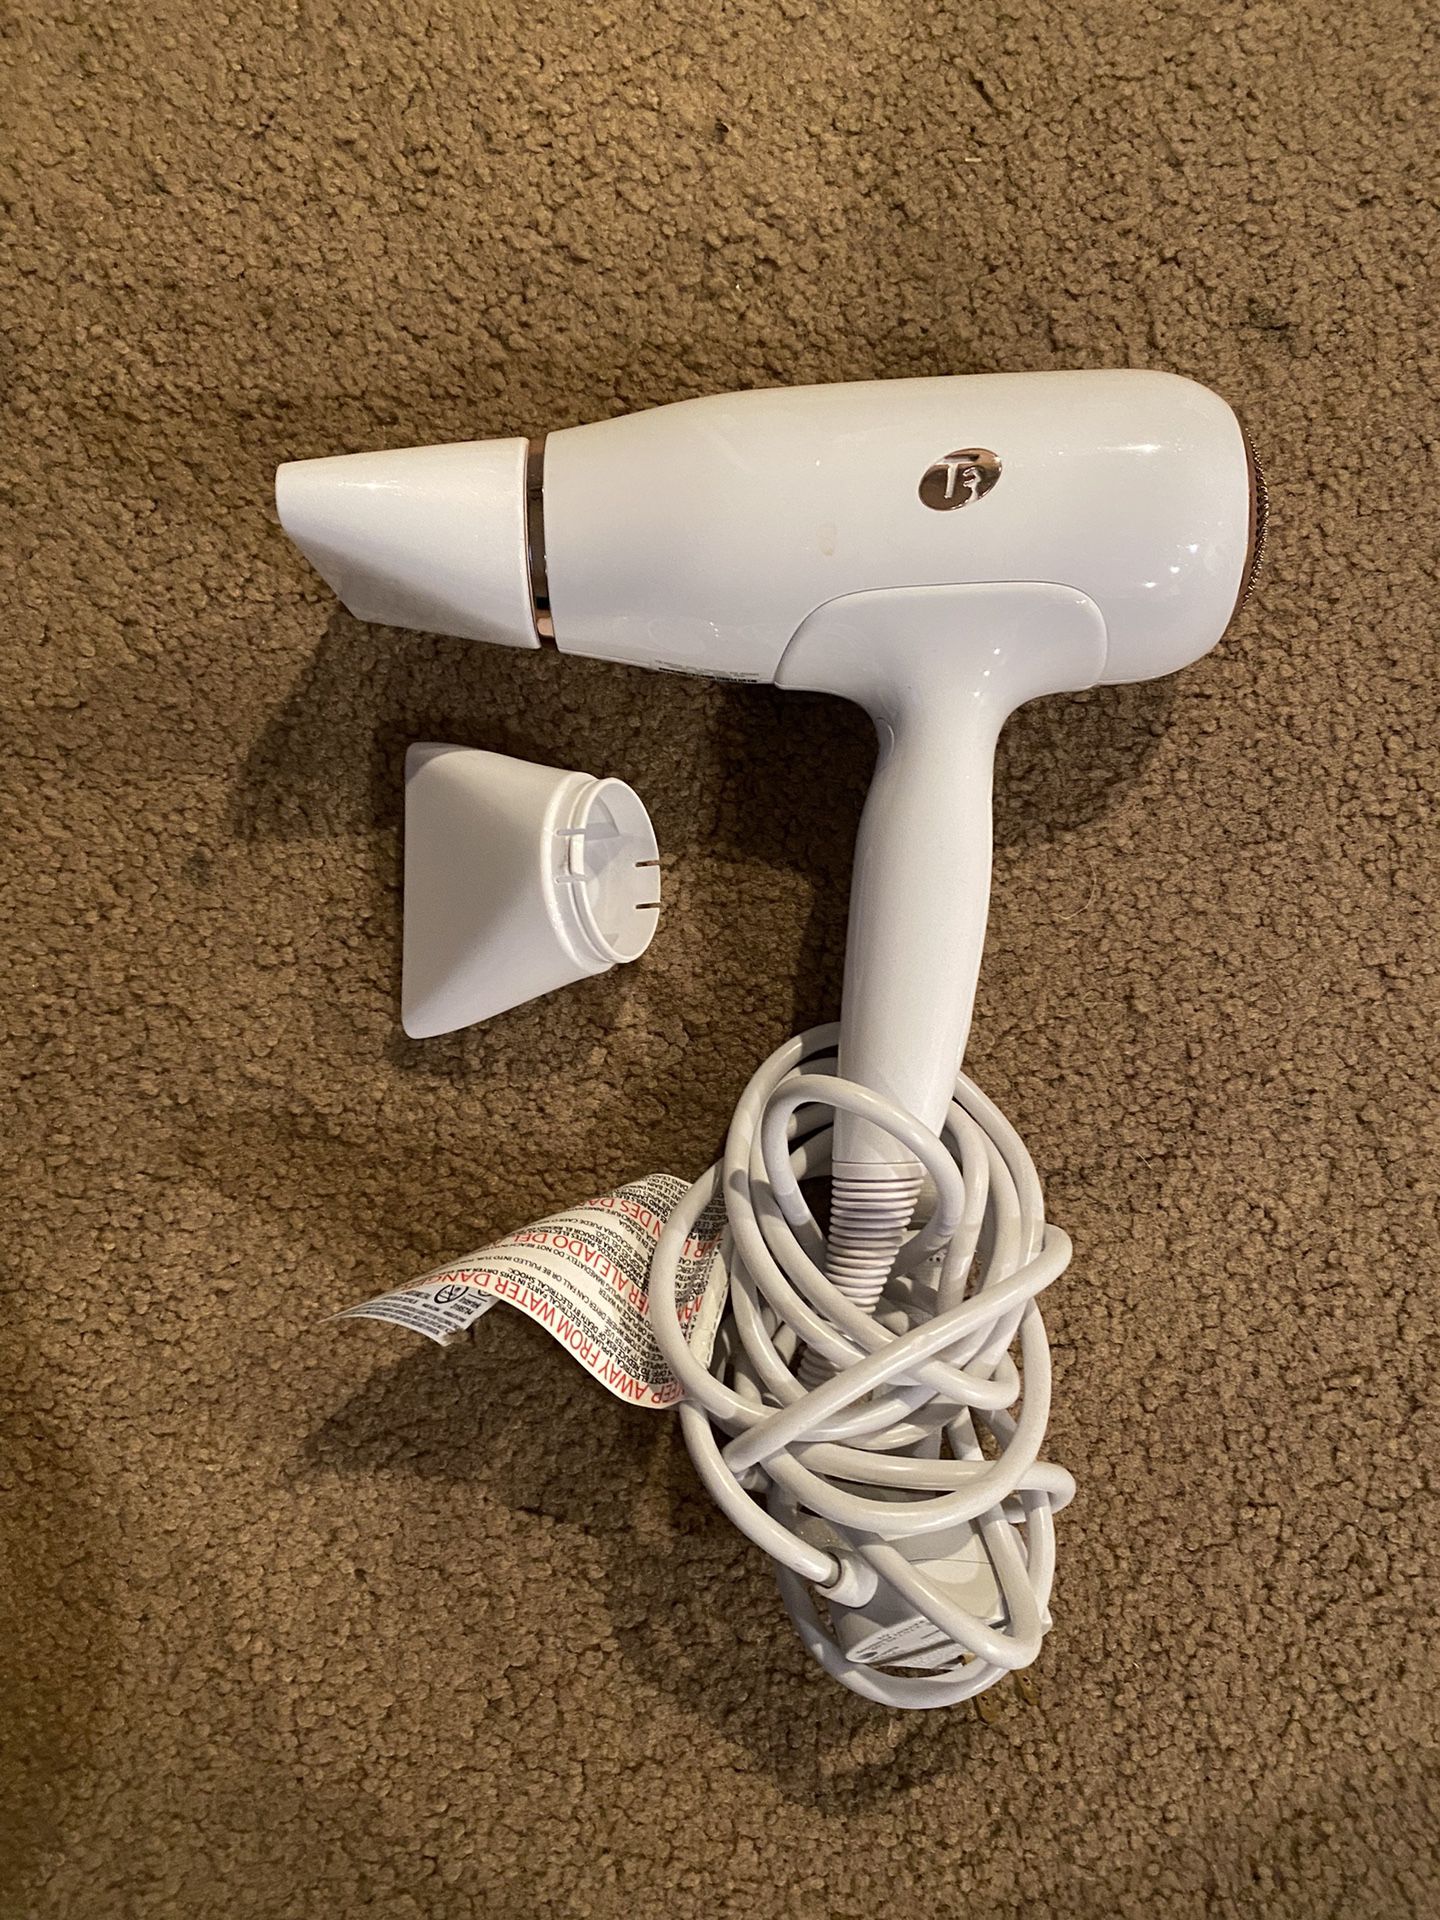 T3 Featherweight 3i Professional Ionic Hair Dryer - White (76800)